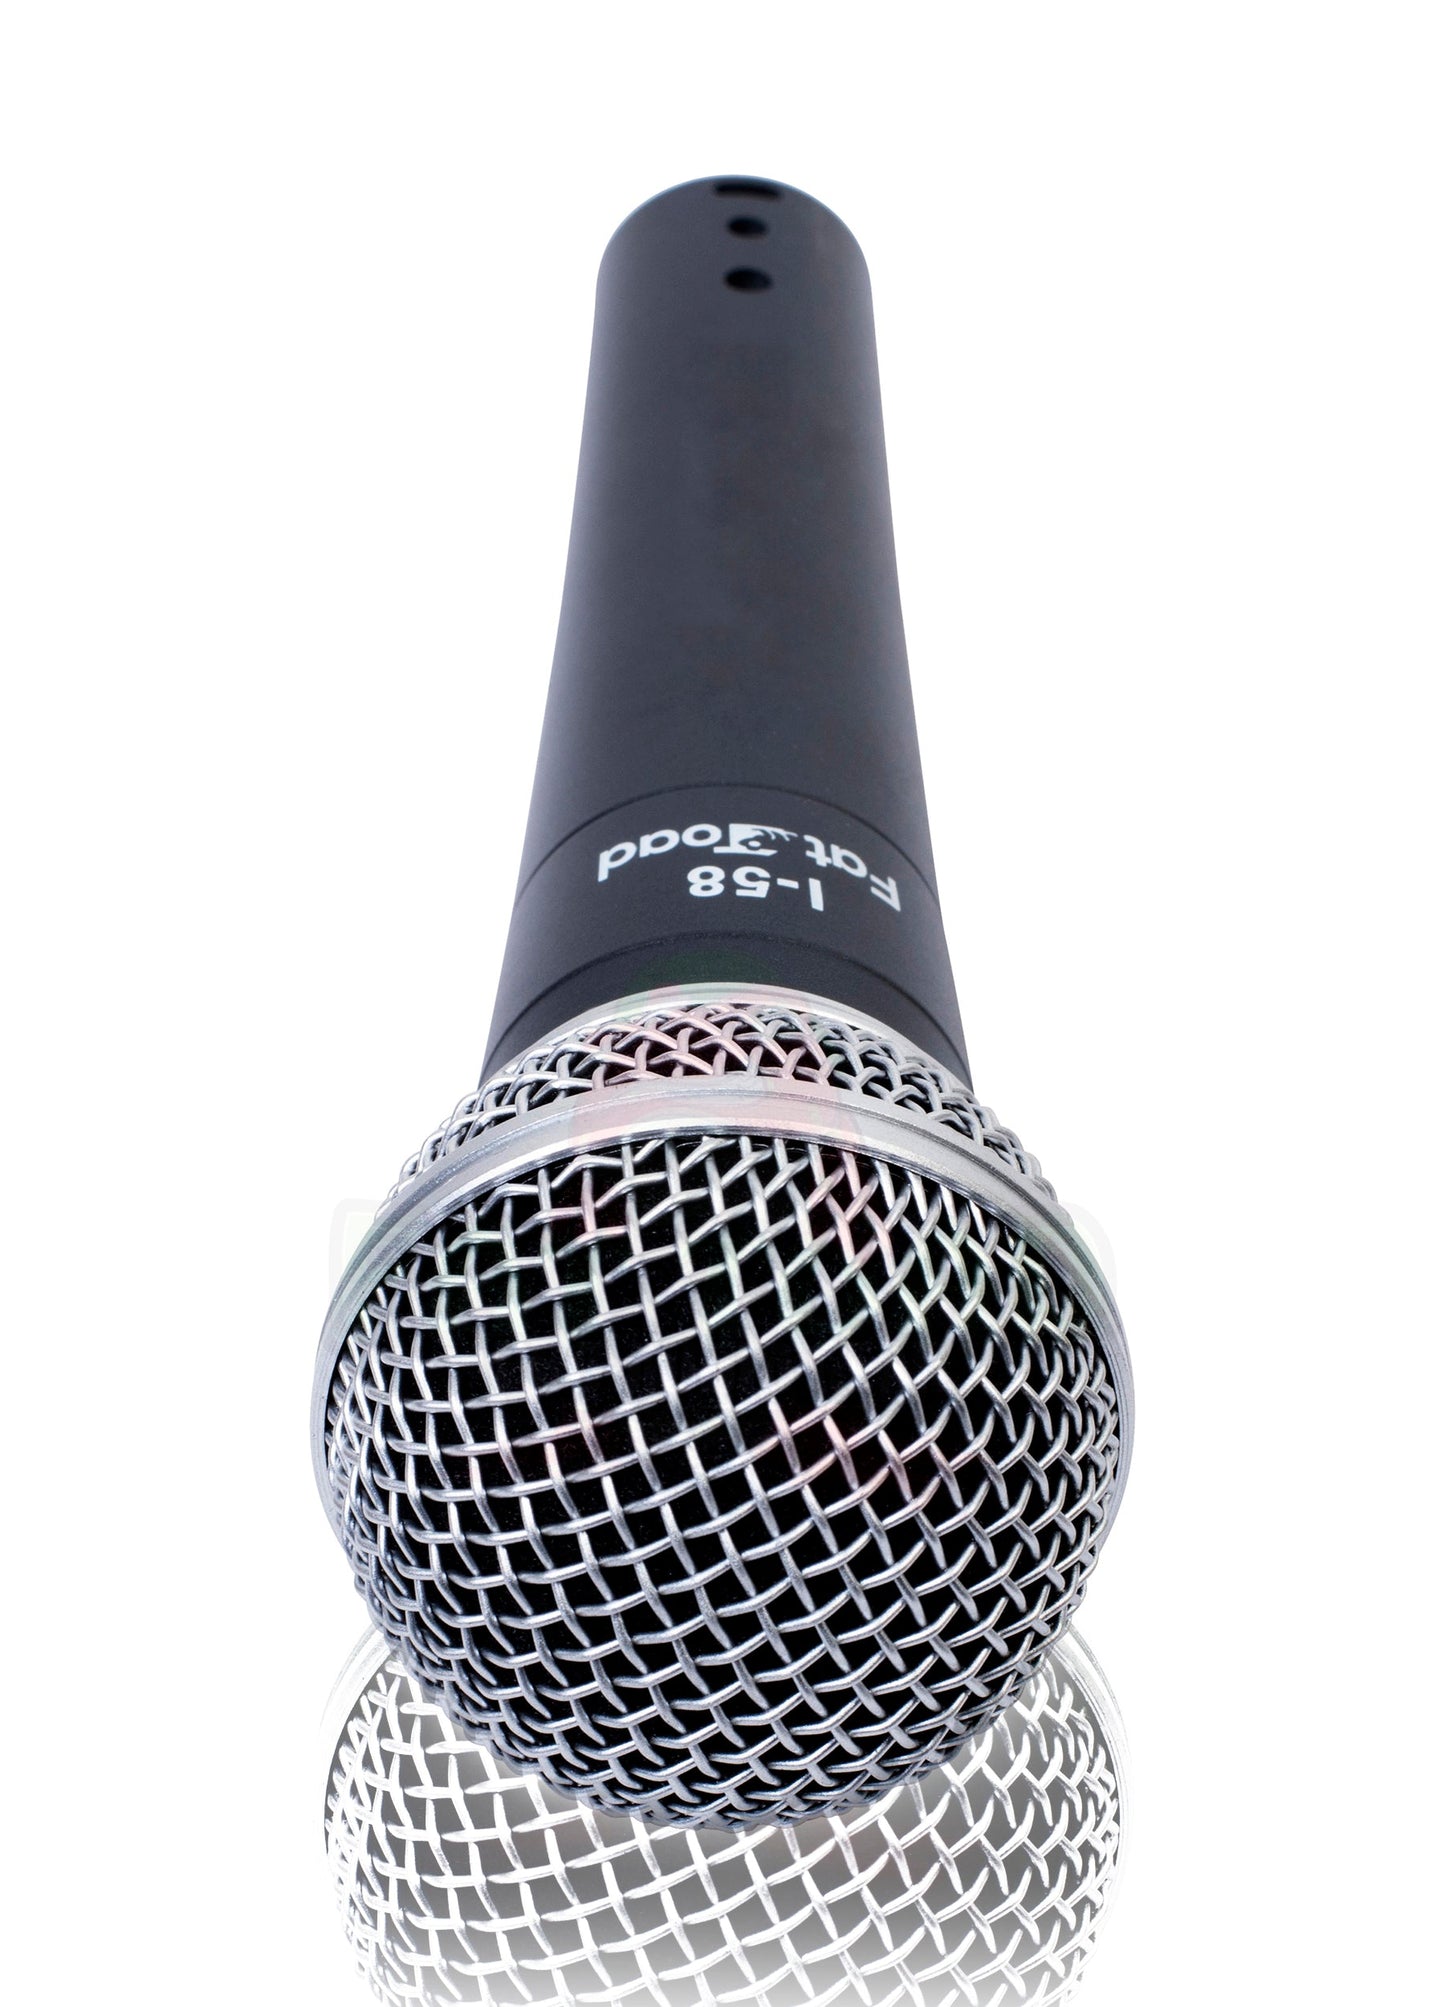 Cardioid Dynamic Microphone with Mic Clip by FAT TOAD - Vocal Handheld, Unidirectional Mic - Singing Wired Microphone for Music Stage Performances